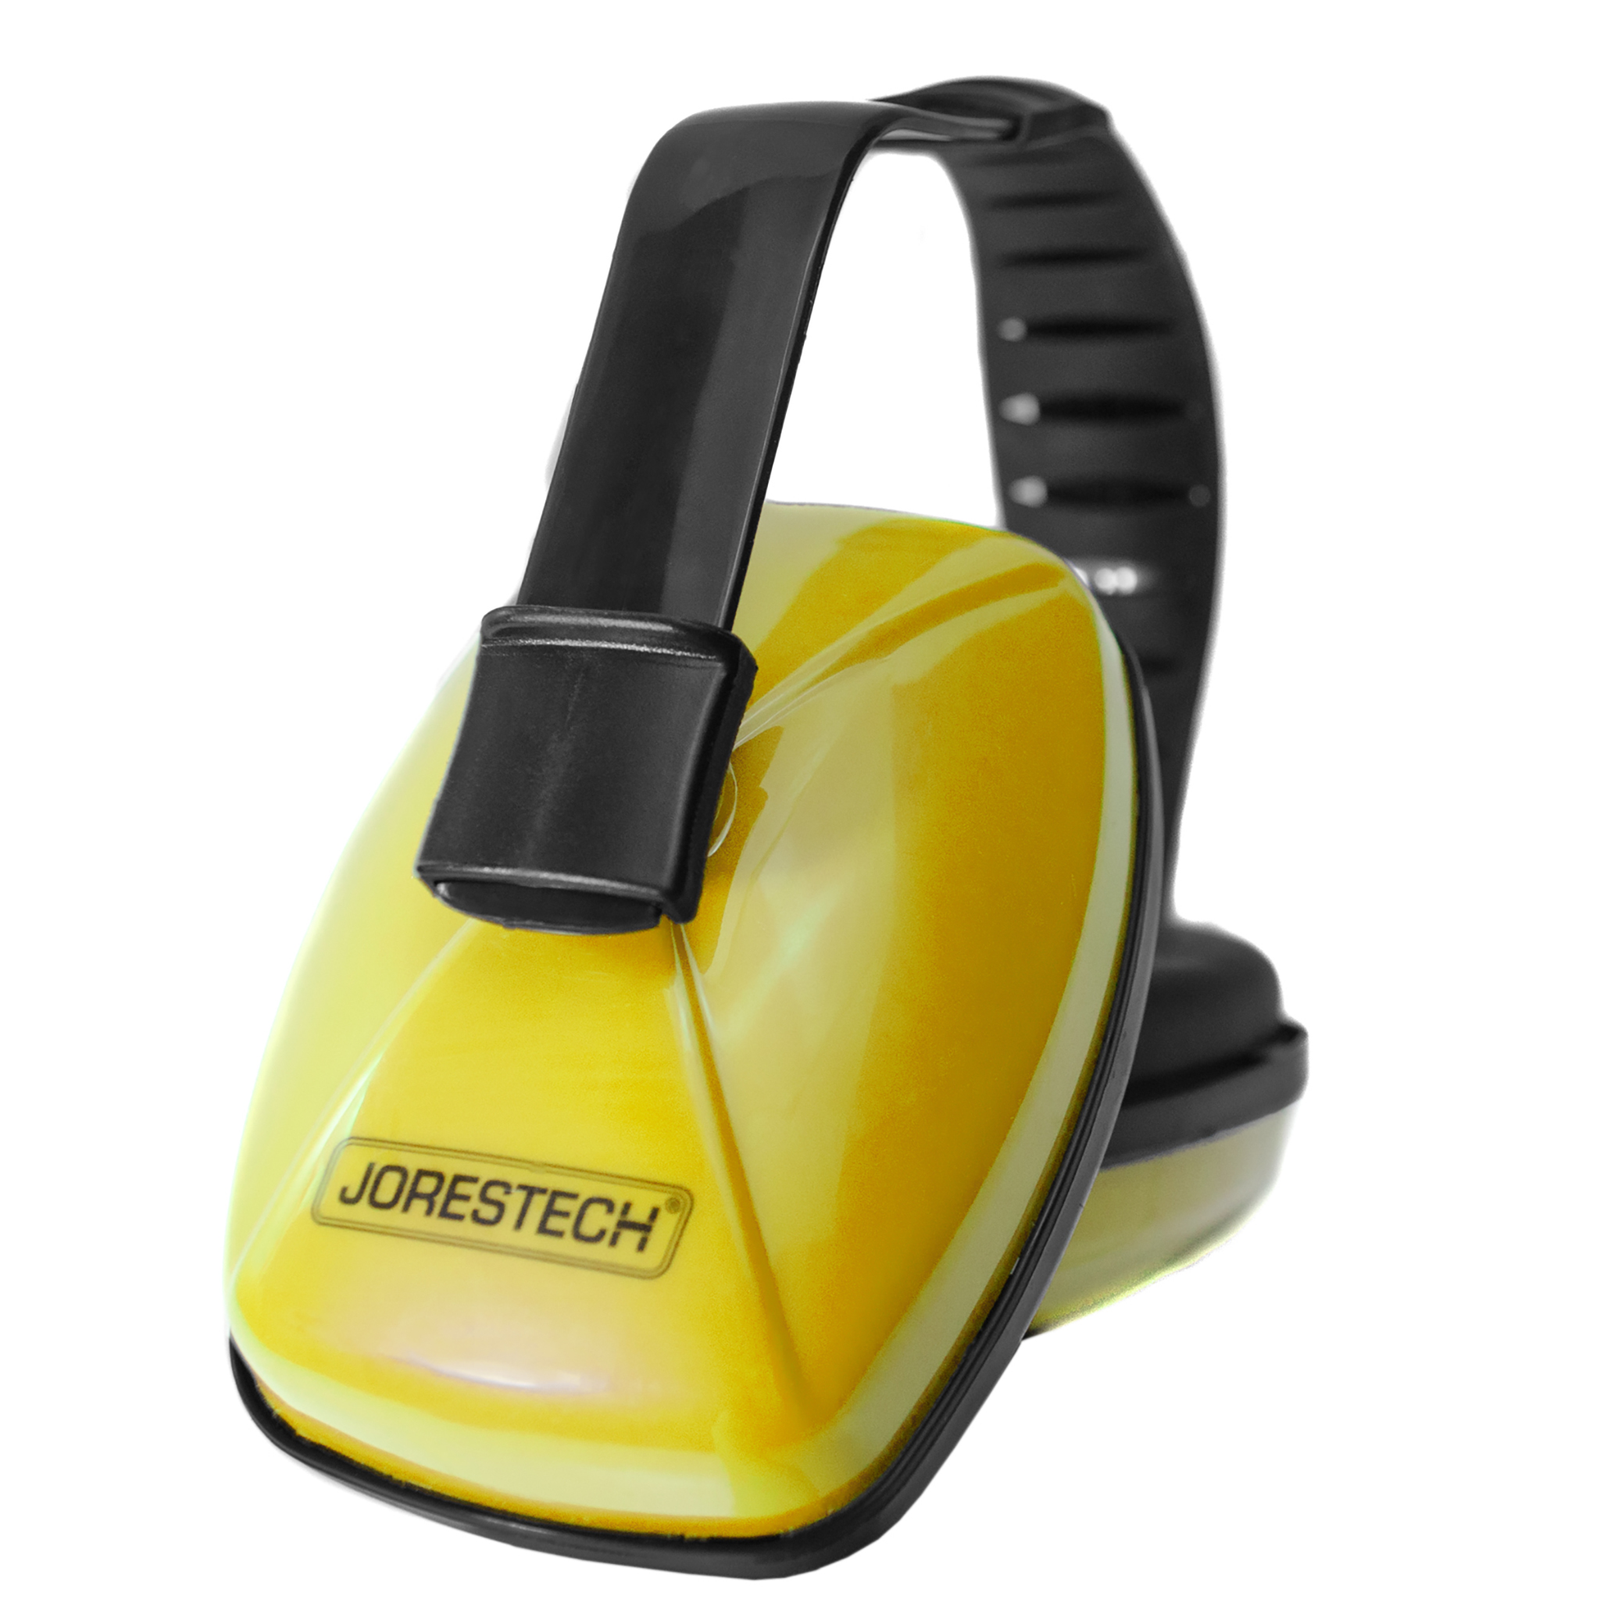 side view of the red and black 23 NRR noise reduction JORESTECH ear muff for hearing protection